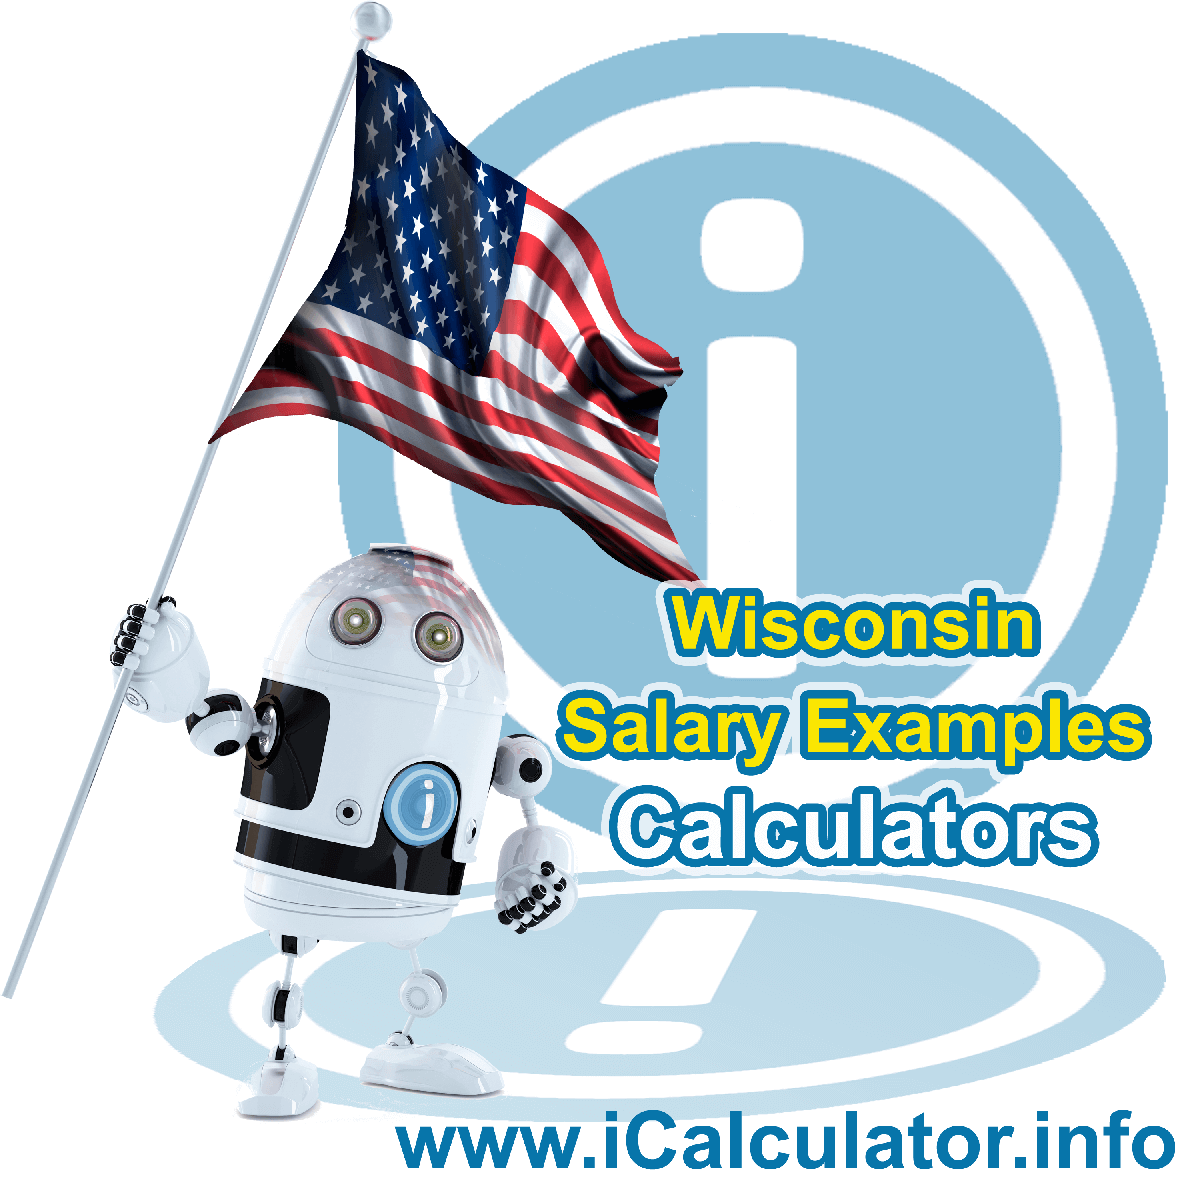 Wisconsin Salary Example for $ 30,000.00 in 2023 | iCalculator™ | $ 30,000.00 salary example for employee and employer paying Wisconsin State tincome taxes. Detailed salary after tax calculation including Wisconsin State Tax, Federal State Tax, Medicare Deductions, Social Security, Capital Gains and other income tax and salary deductions complete with supporting Wisconsin state tax tables 